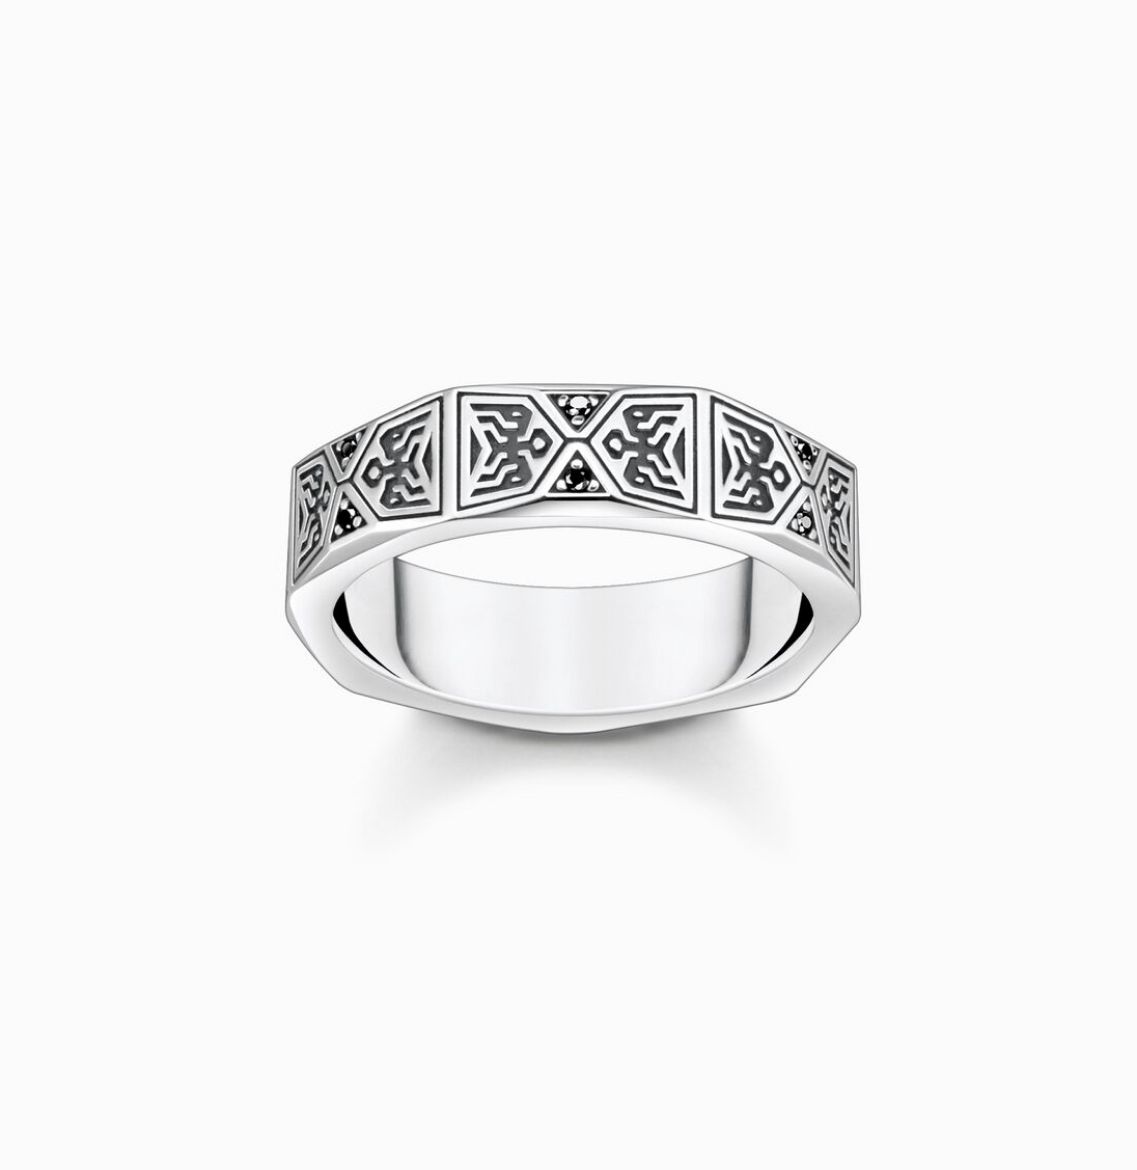 Picture of Faceted Silver Band Ring with Engravings and Black Zirconia